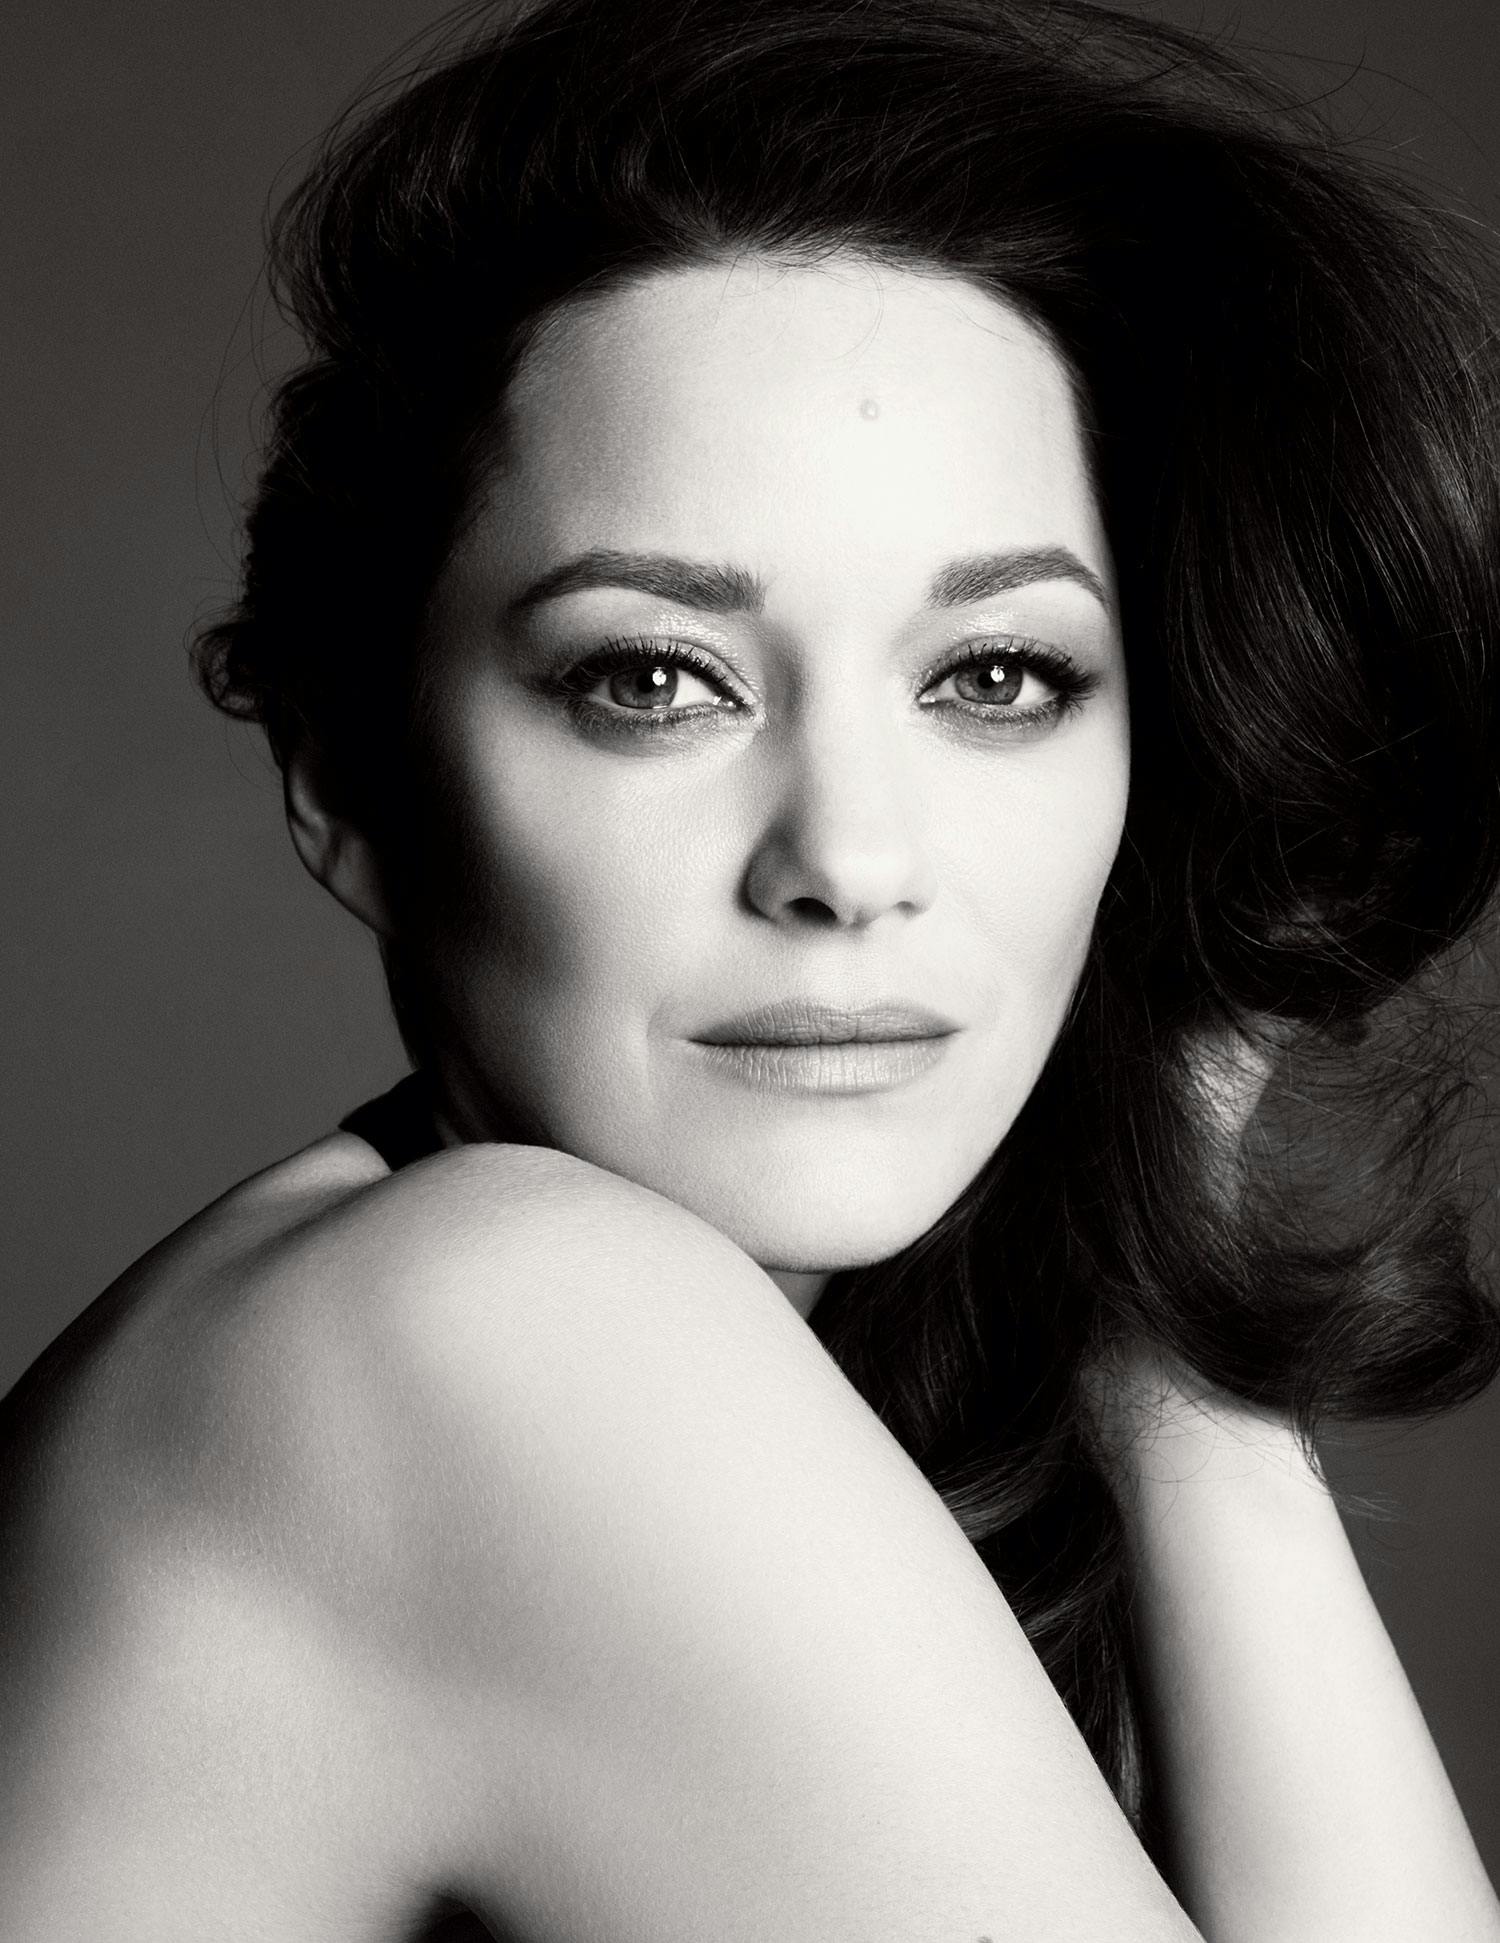 Weekend Perfume Movies: Chanel No 5 with Marion Cotillard ~ Perfume Ads